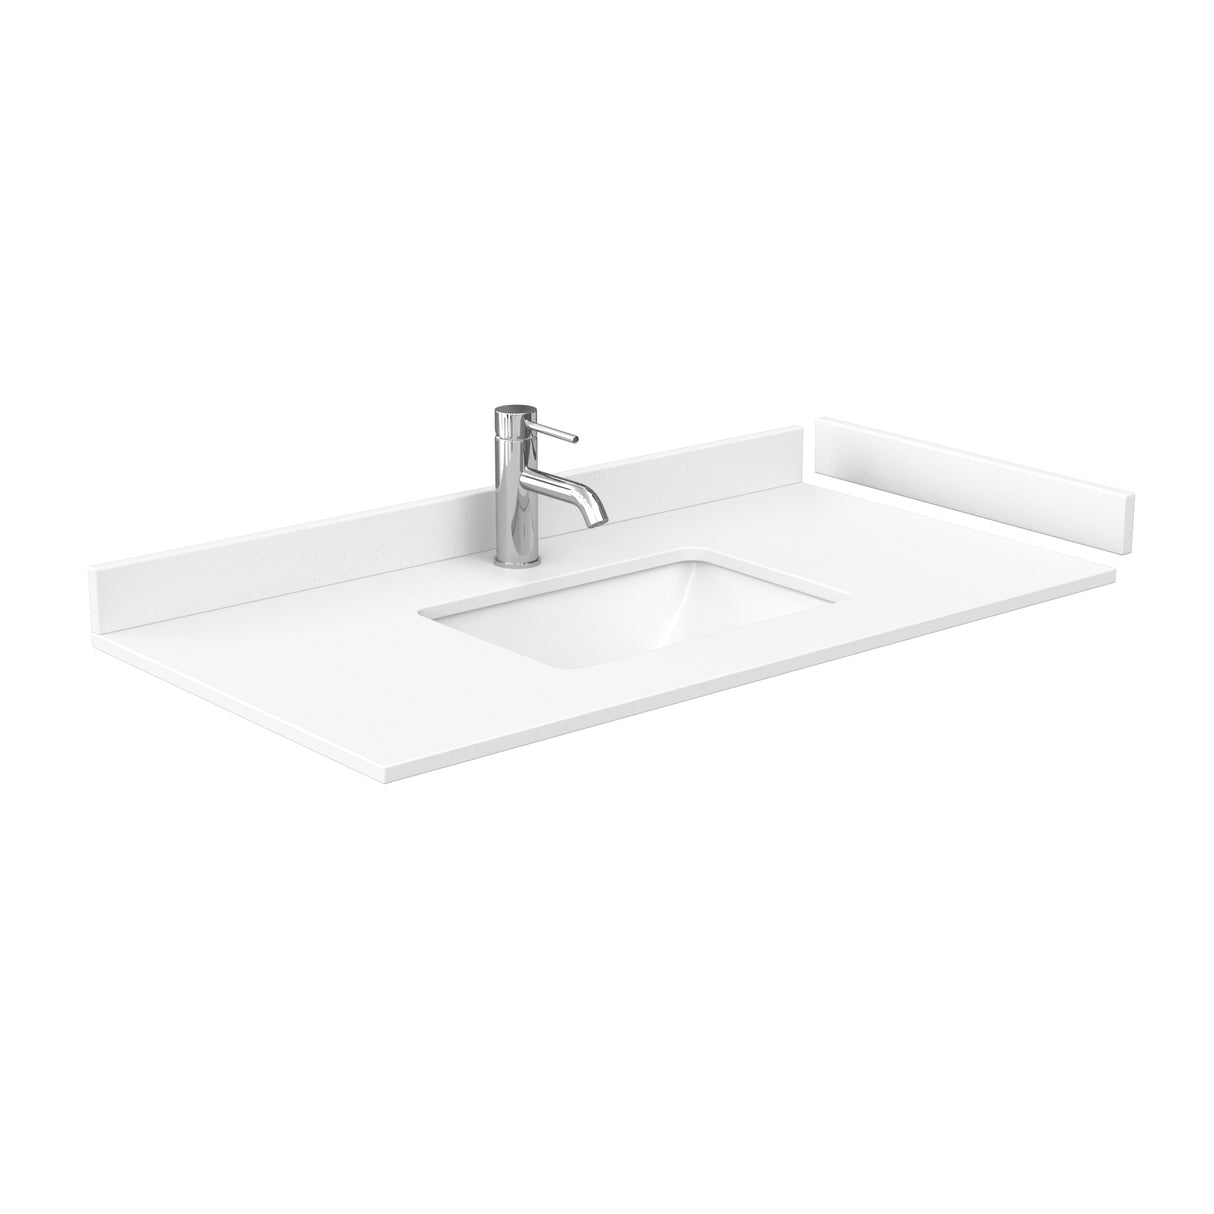 Amici 42 Inch Single Bathroom Vanity in White White Cultured Marble Countertop Undermount Square Sink Brushed Nickel Trim